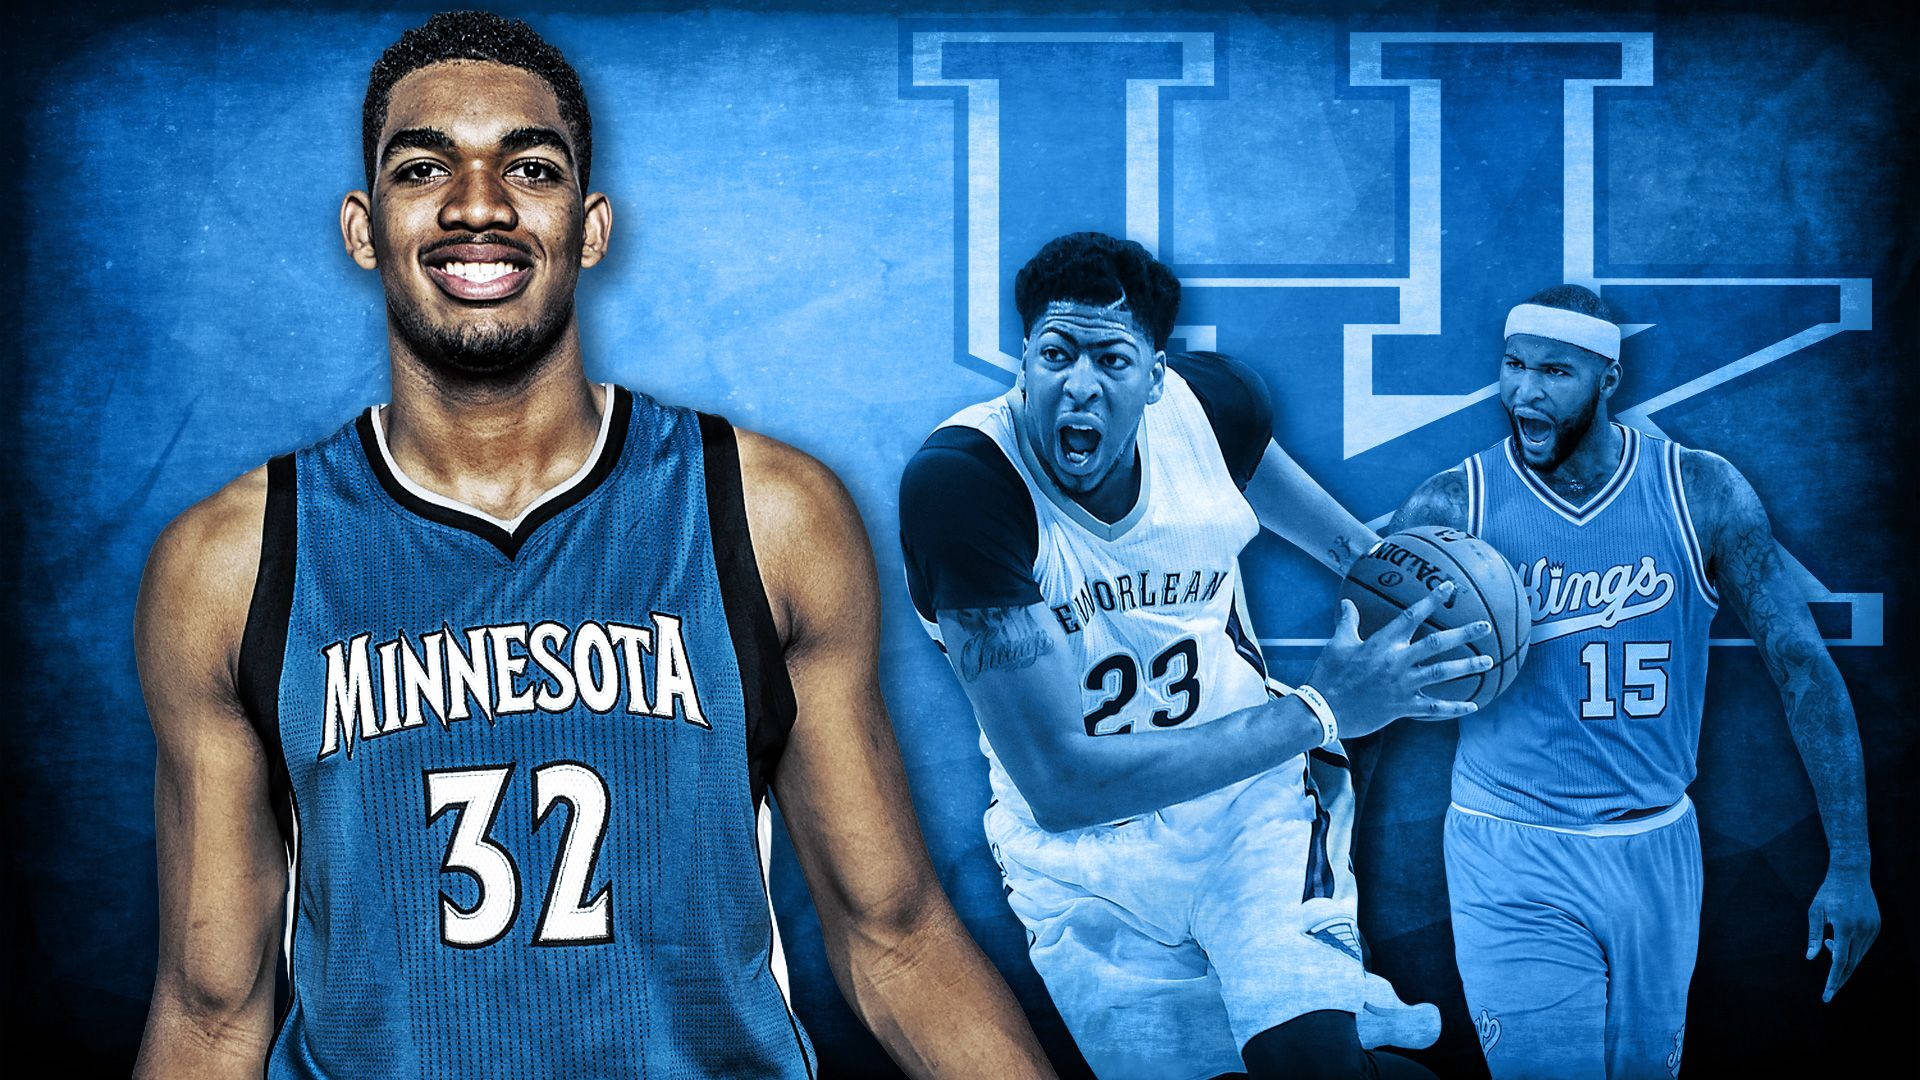 Karl-anthony Towns With Davis & Cousins Background